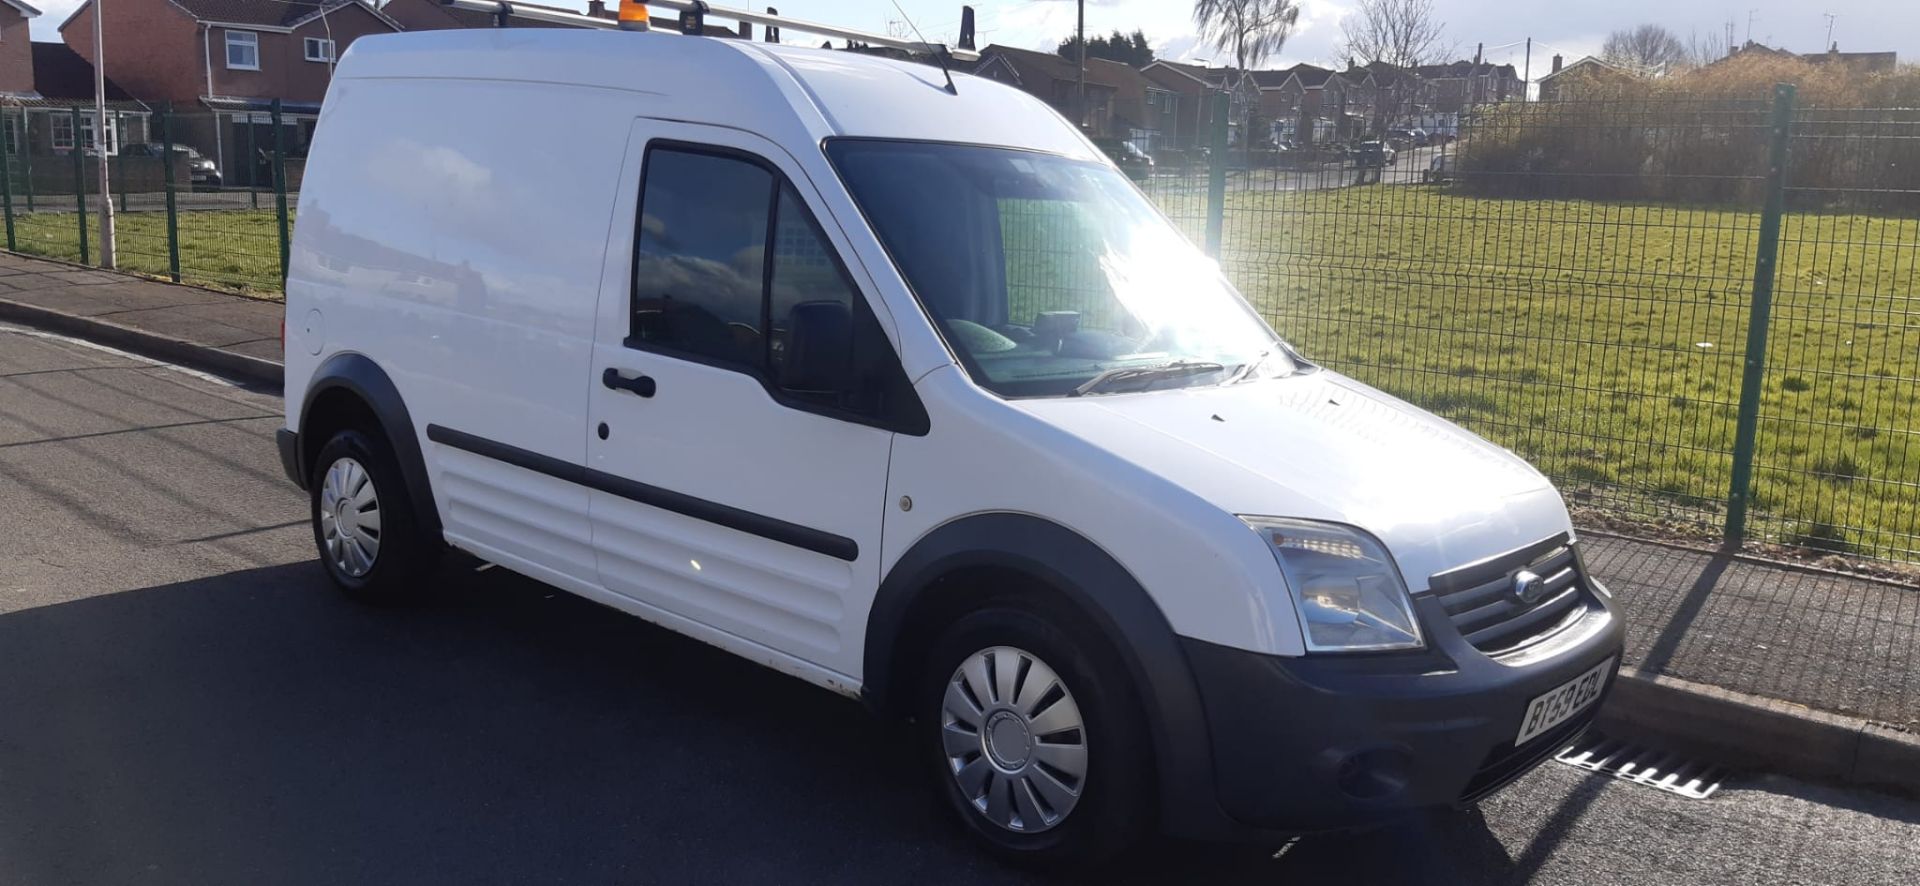 2010/59 FORD CONNECT HIGH TOP 90 T230 WHITE PANEL VAN, 166K MILES *NO VAT*